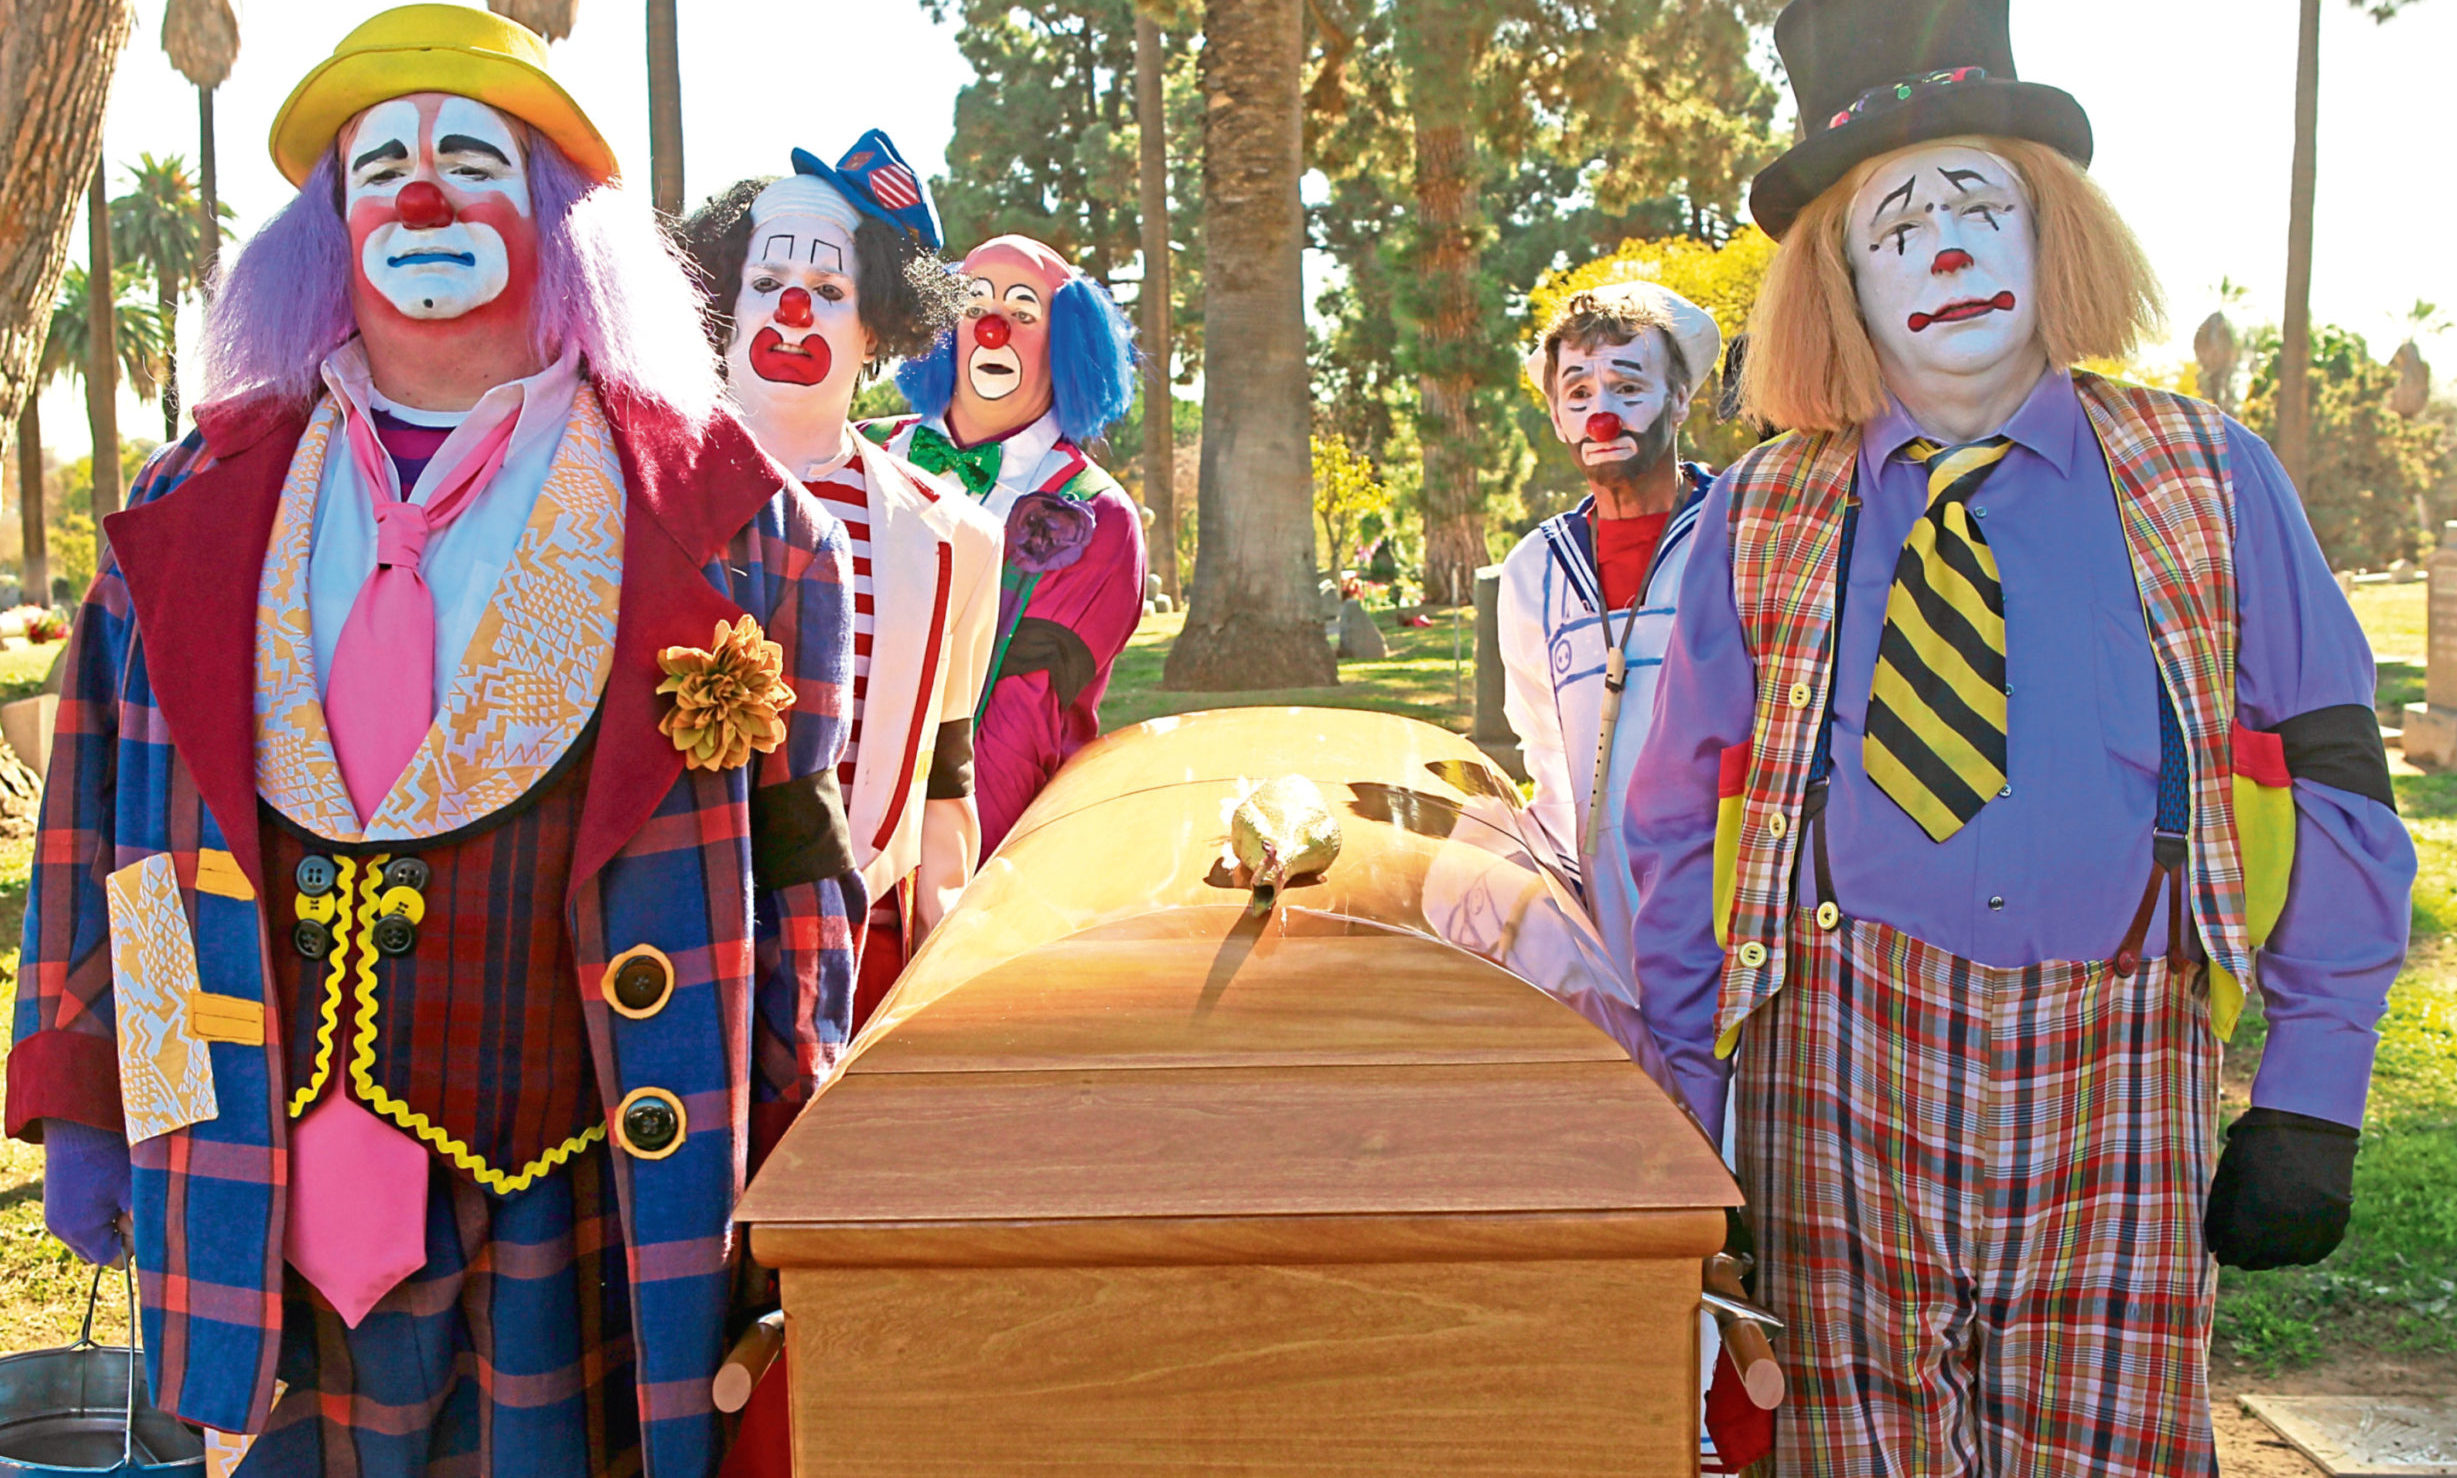 Cam (Eric Stonestreet, left) and fellow clowns take beloved mentor Al to his final resting place in TV series Modern Family